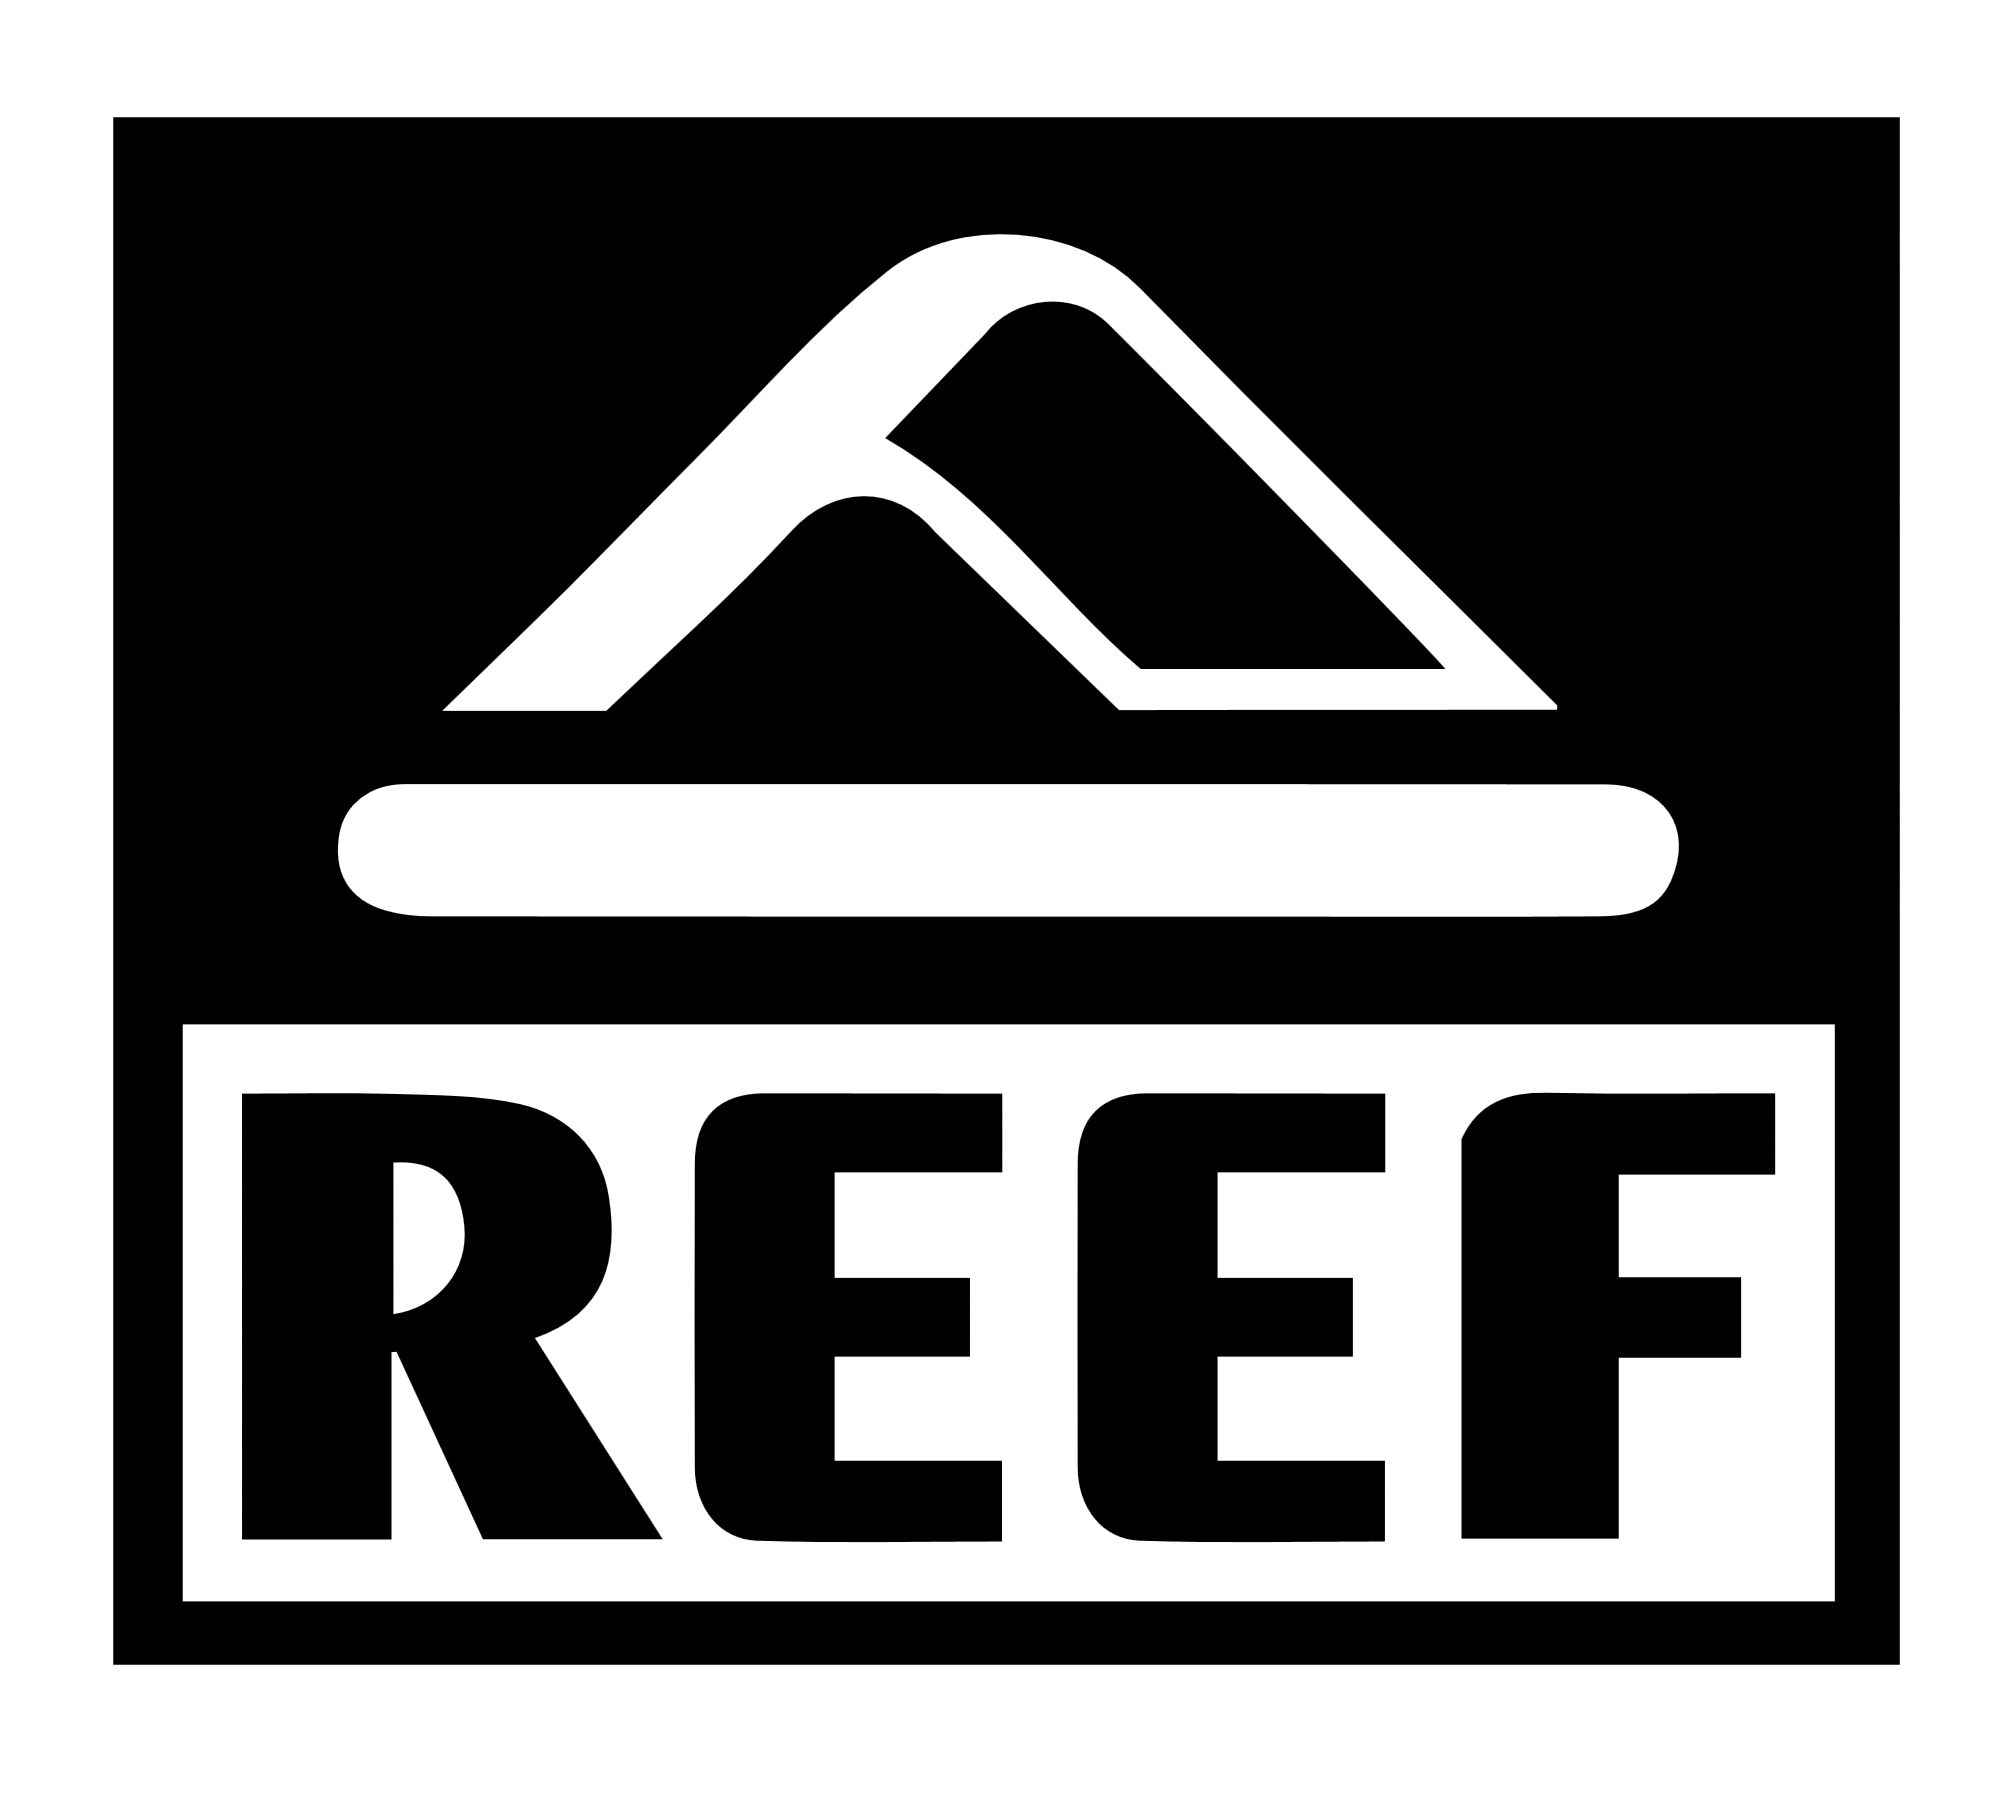  VF to sell Reef to Rockport 